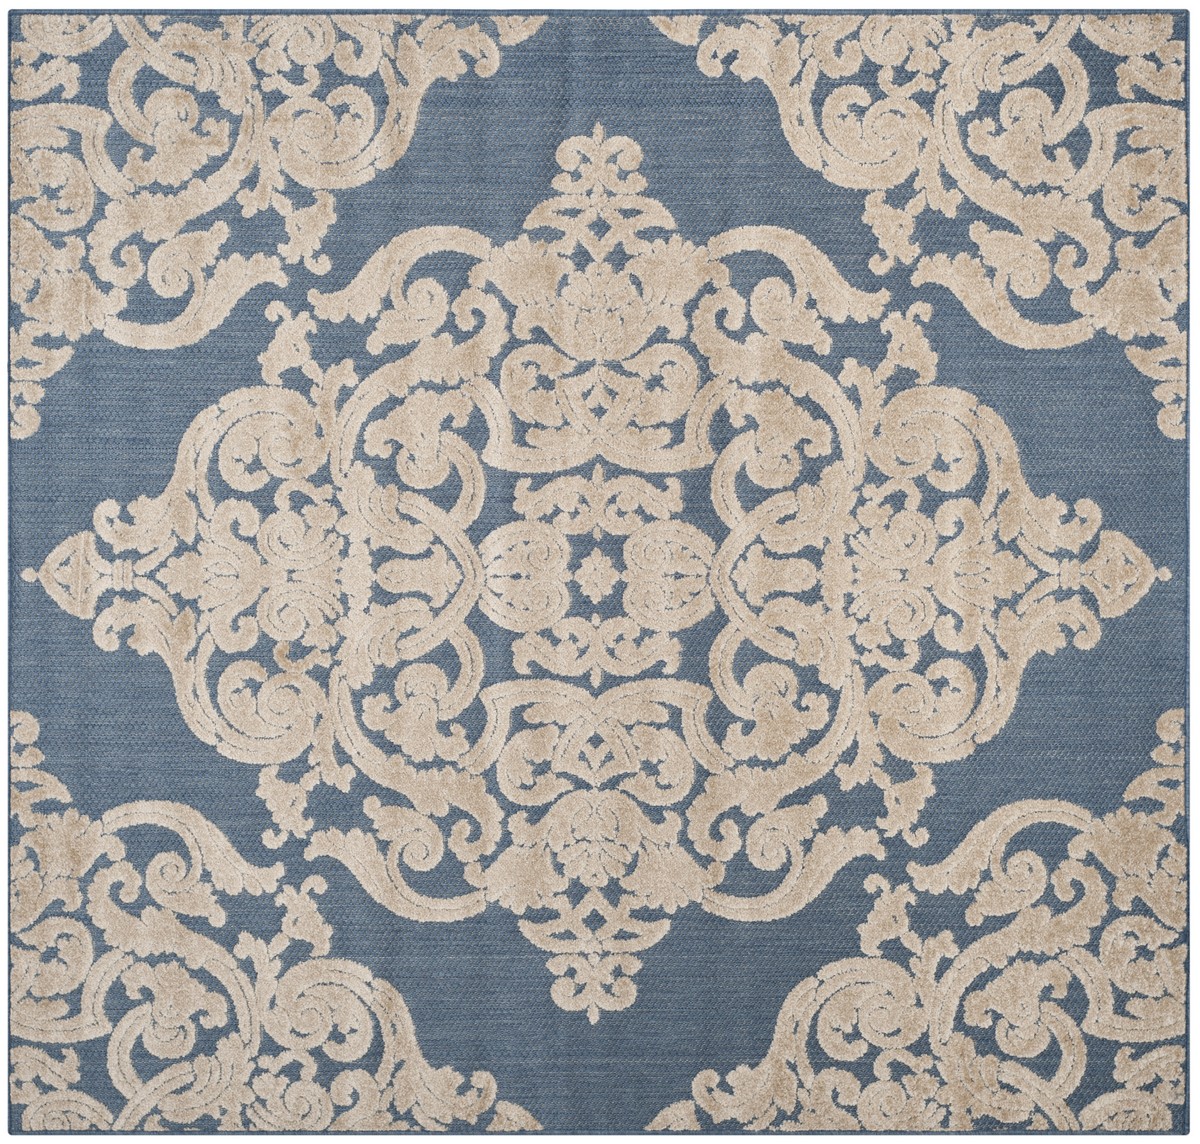 Mnr152a-7sq Monroe Square Area Rug, Blue - 6 Ft.-7 In. X 6 Ft.-7 In.